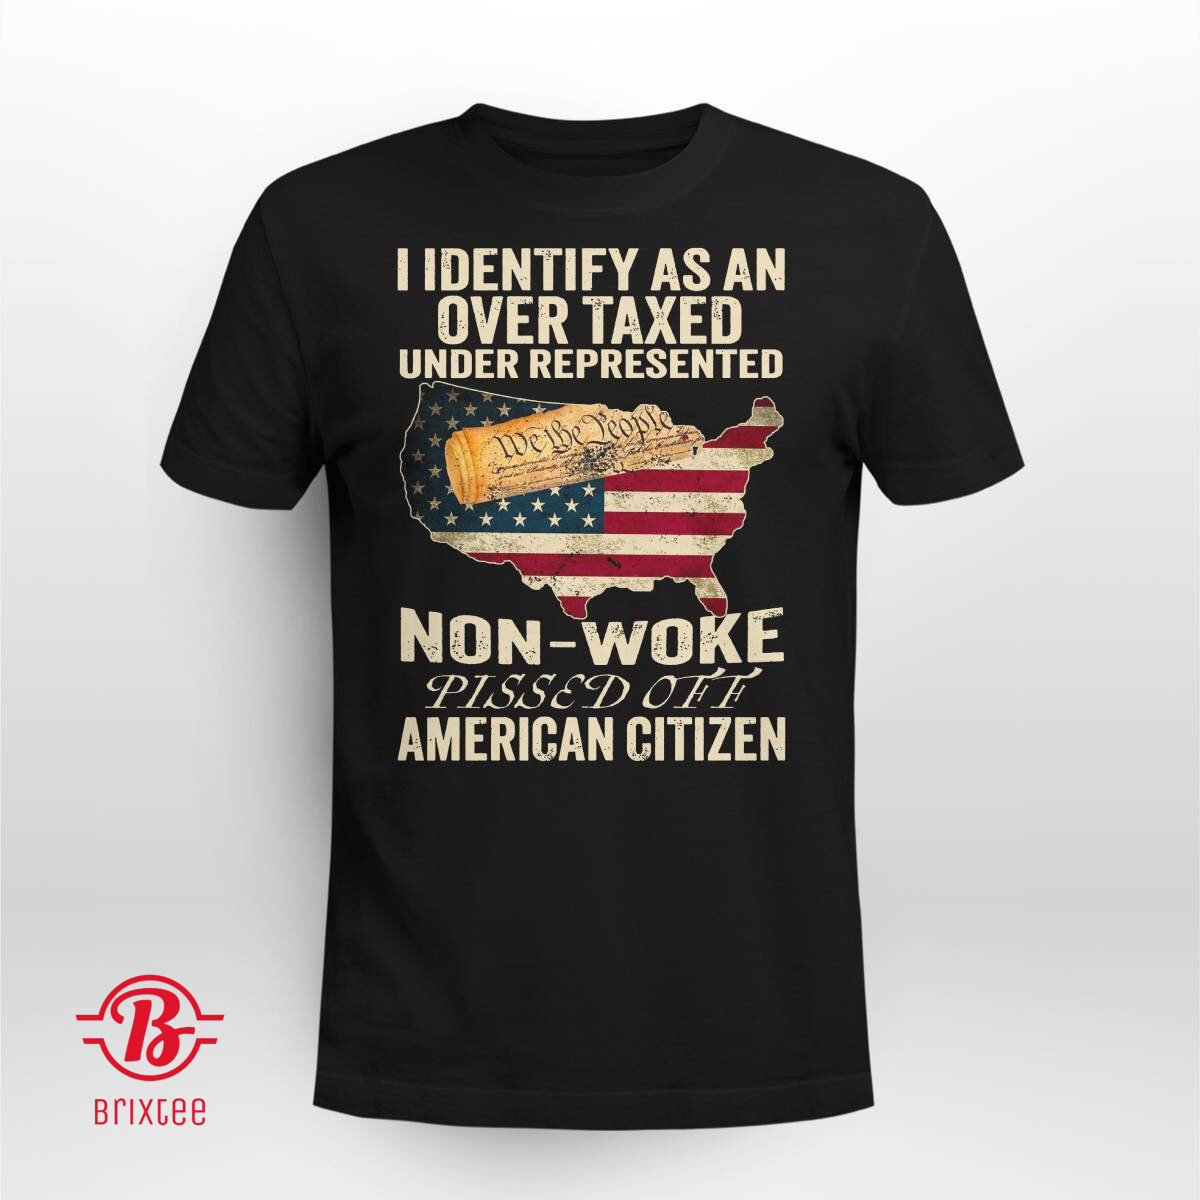 I Identify As An Over Taxed Under Represented Non-Woke Pissed Off American Citizen